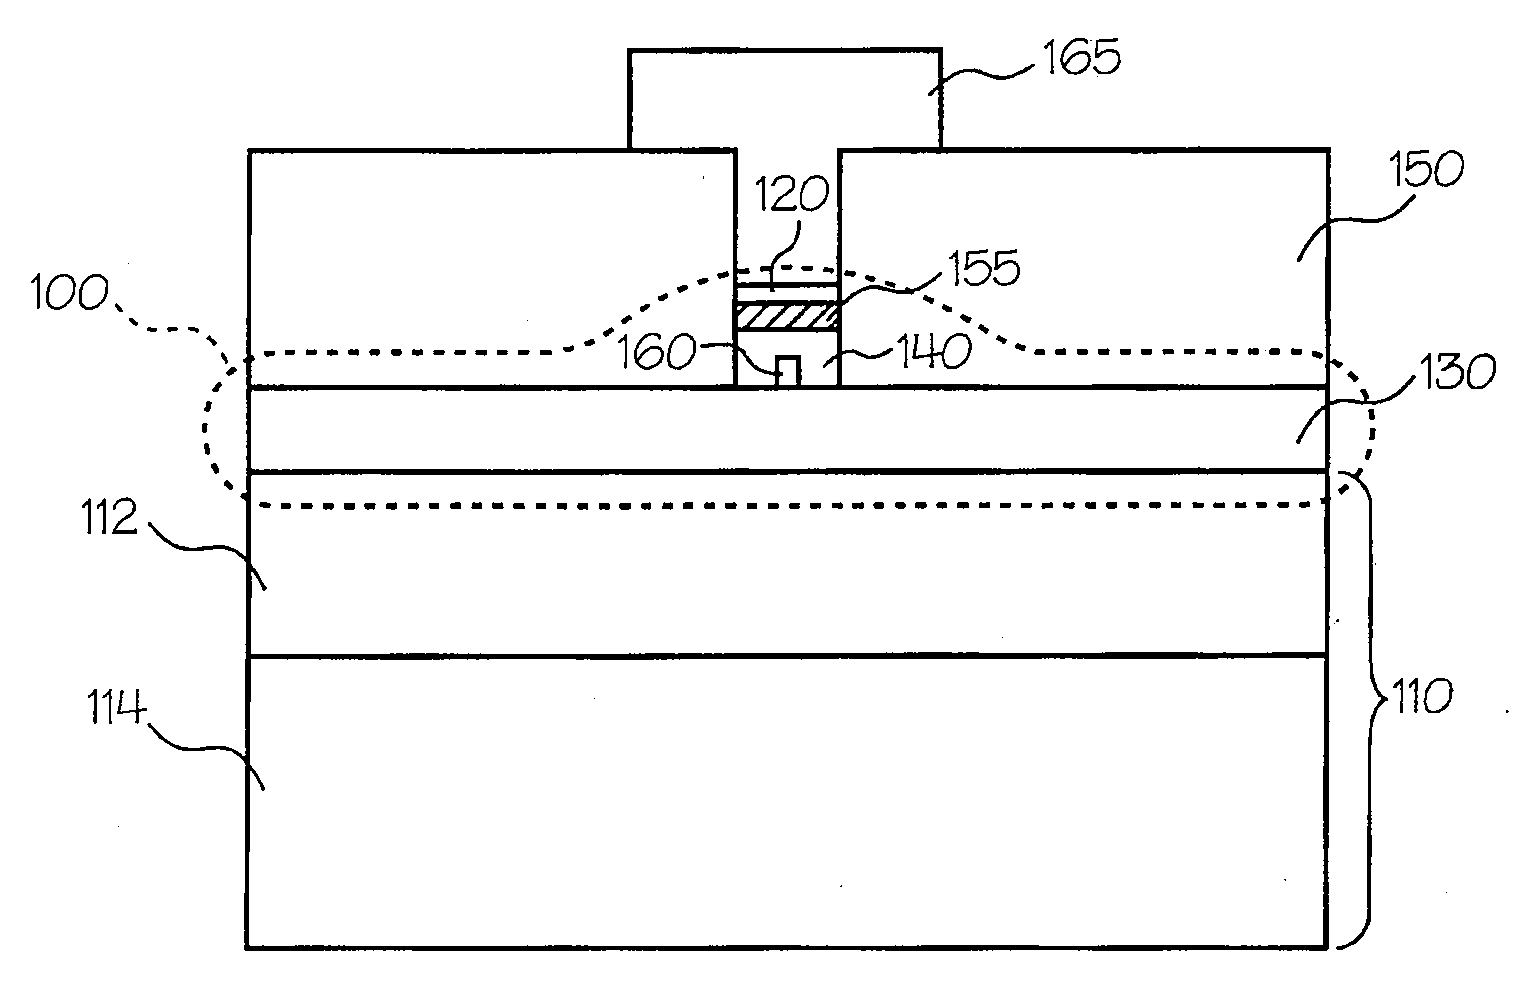 Optimized solid electrolyte for programmable metallization cell devices and structures